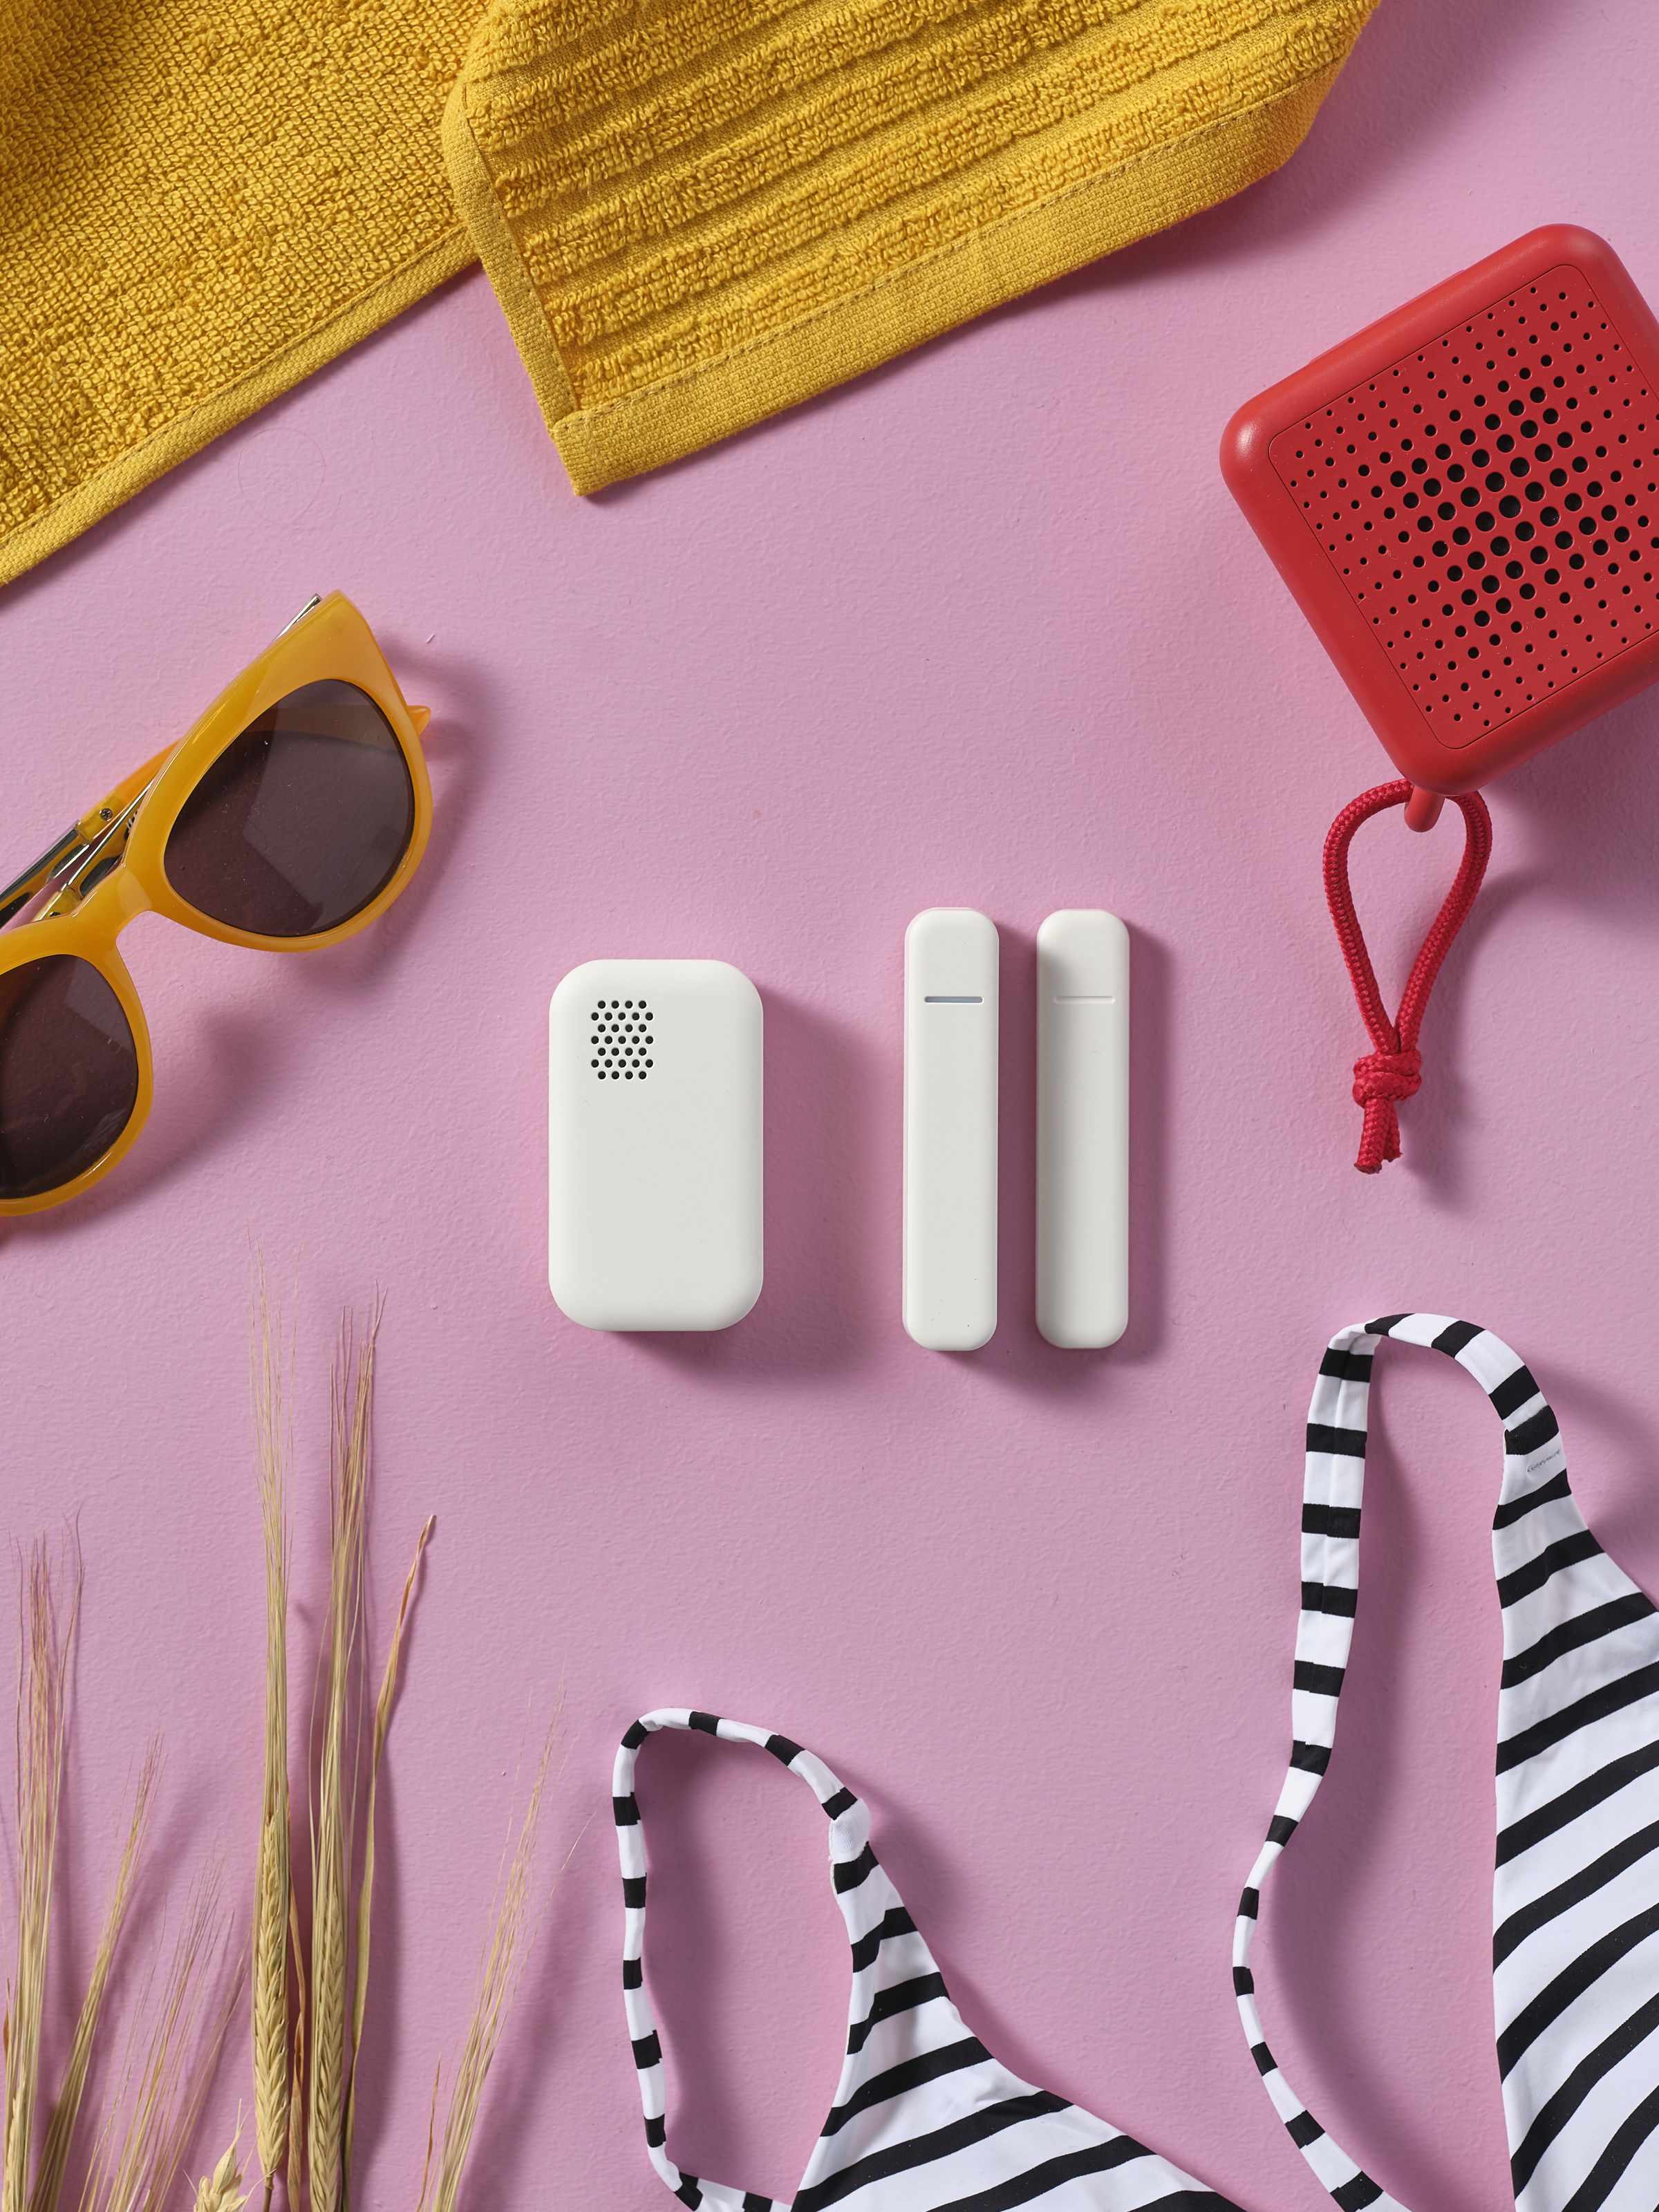 Ikea’s new white Badring and Parasoll sensors on a pink table surrounded by beach gear like sunglasses and bikini.